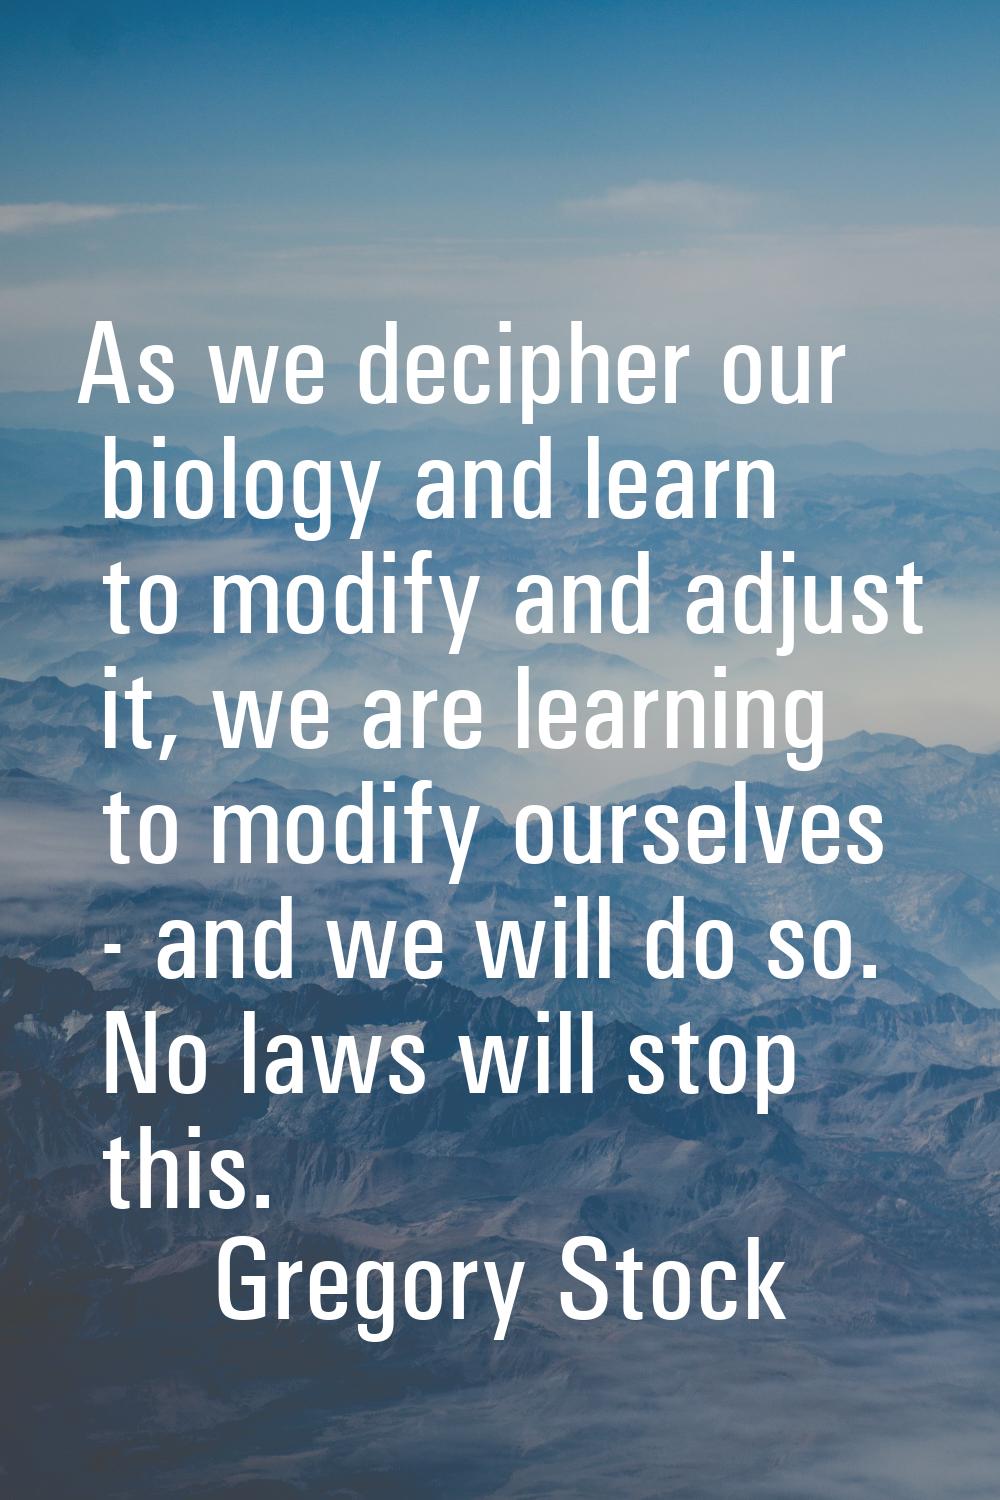 As we decipher our biology and learn to modify and adjust it, we are learning to modify ourselves -